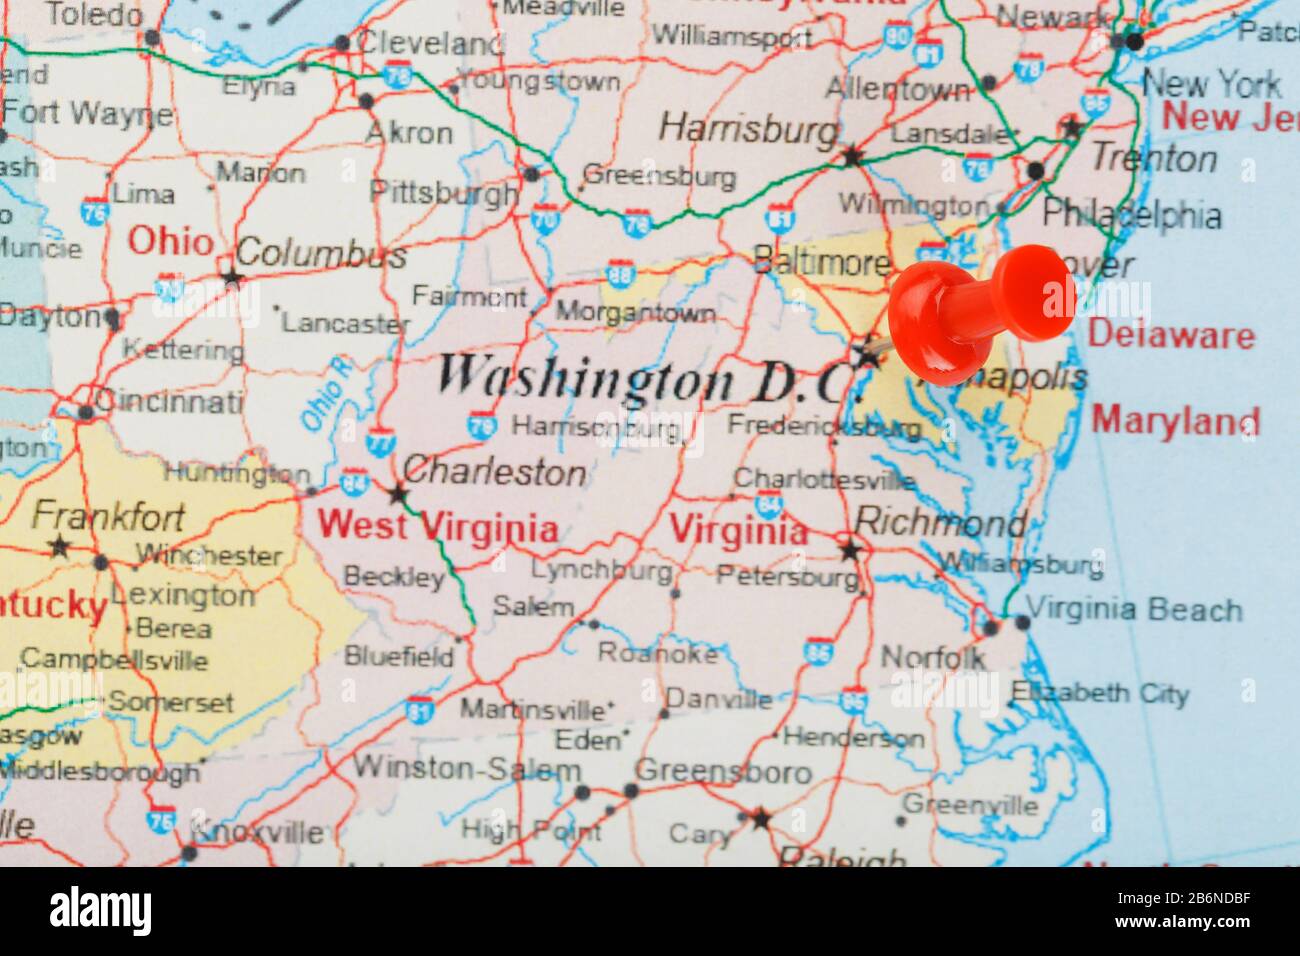 Washington Dc On Map Of Usa Red clerical needle on the map of USA, South Washington, DC and 